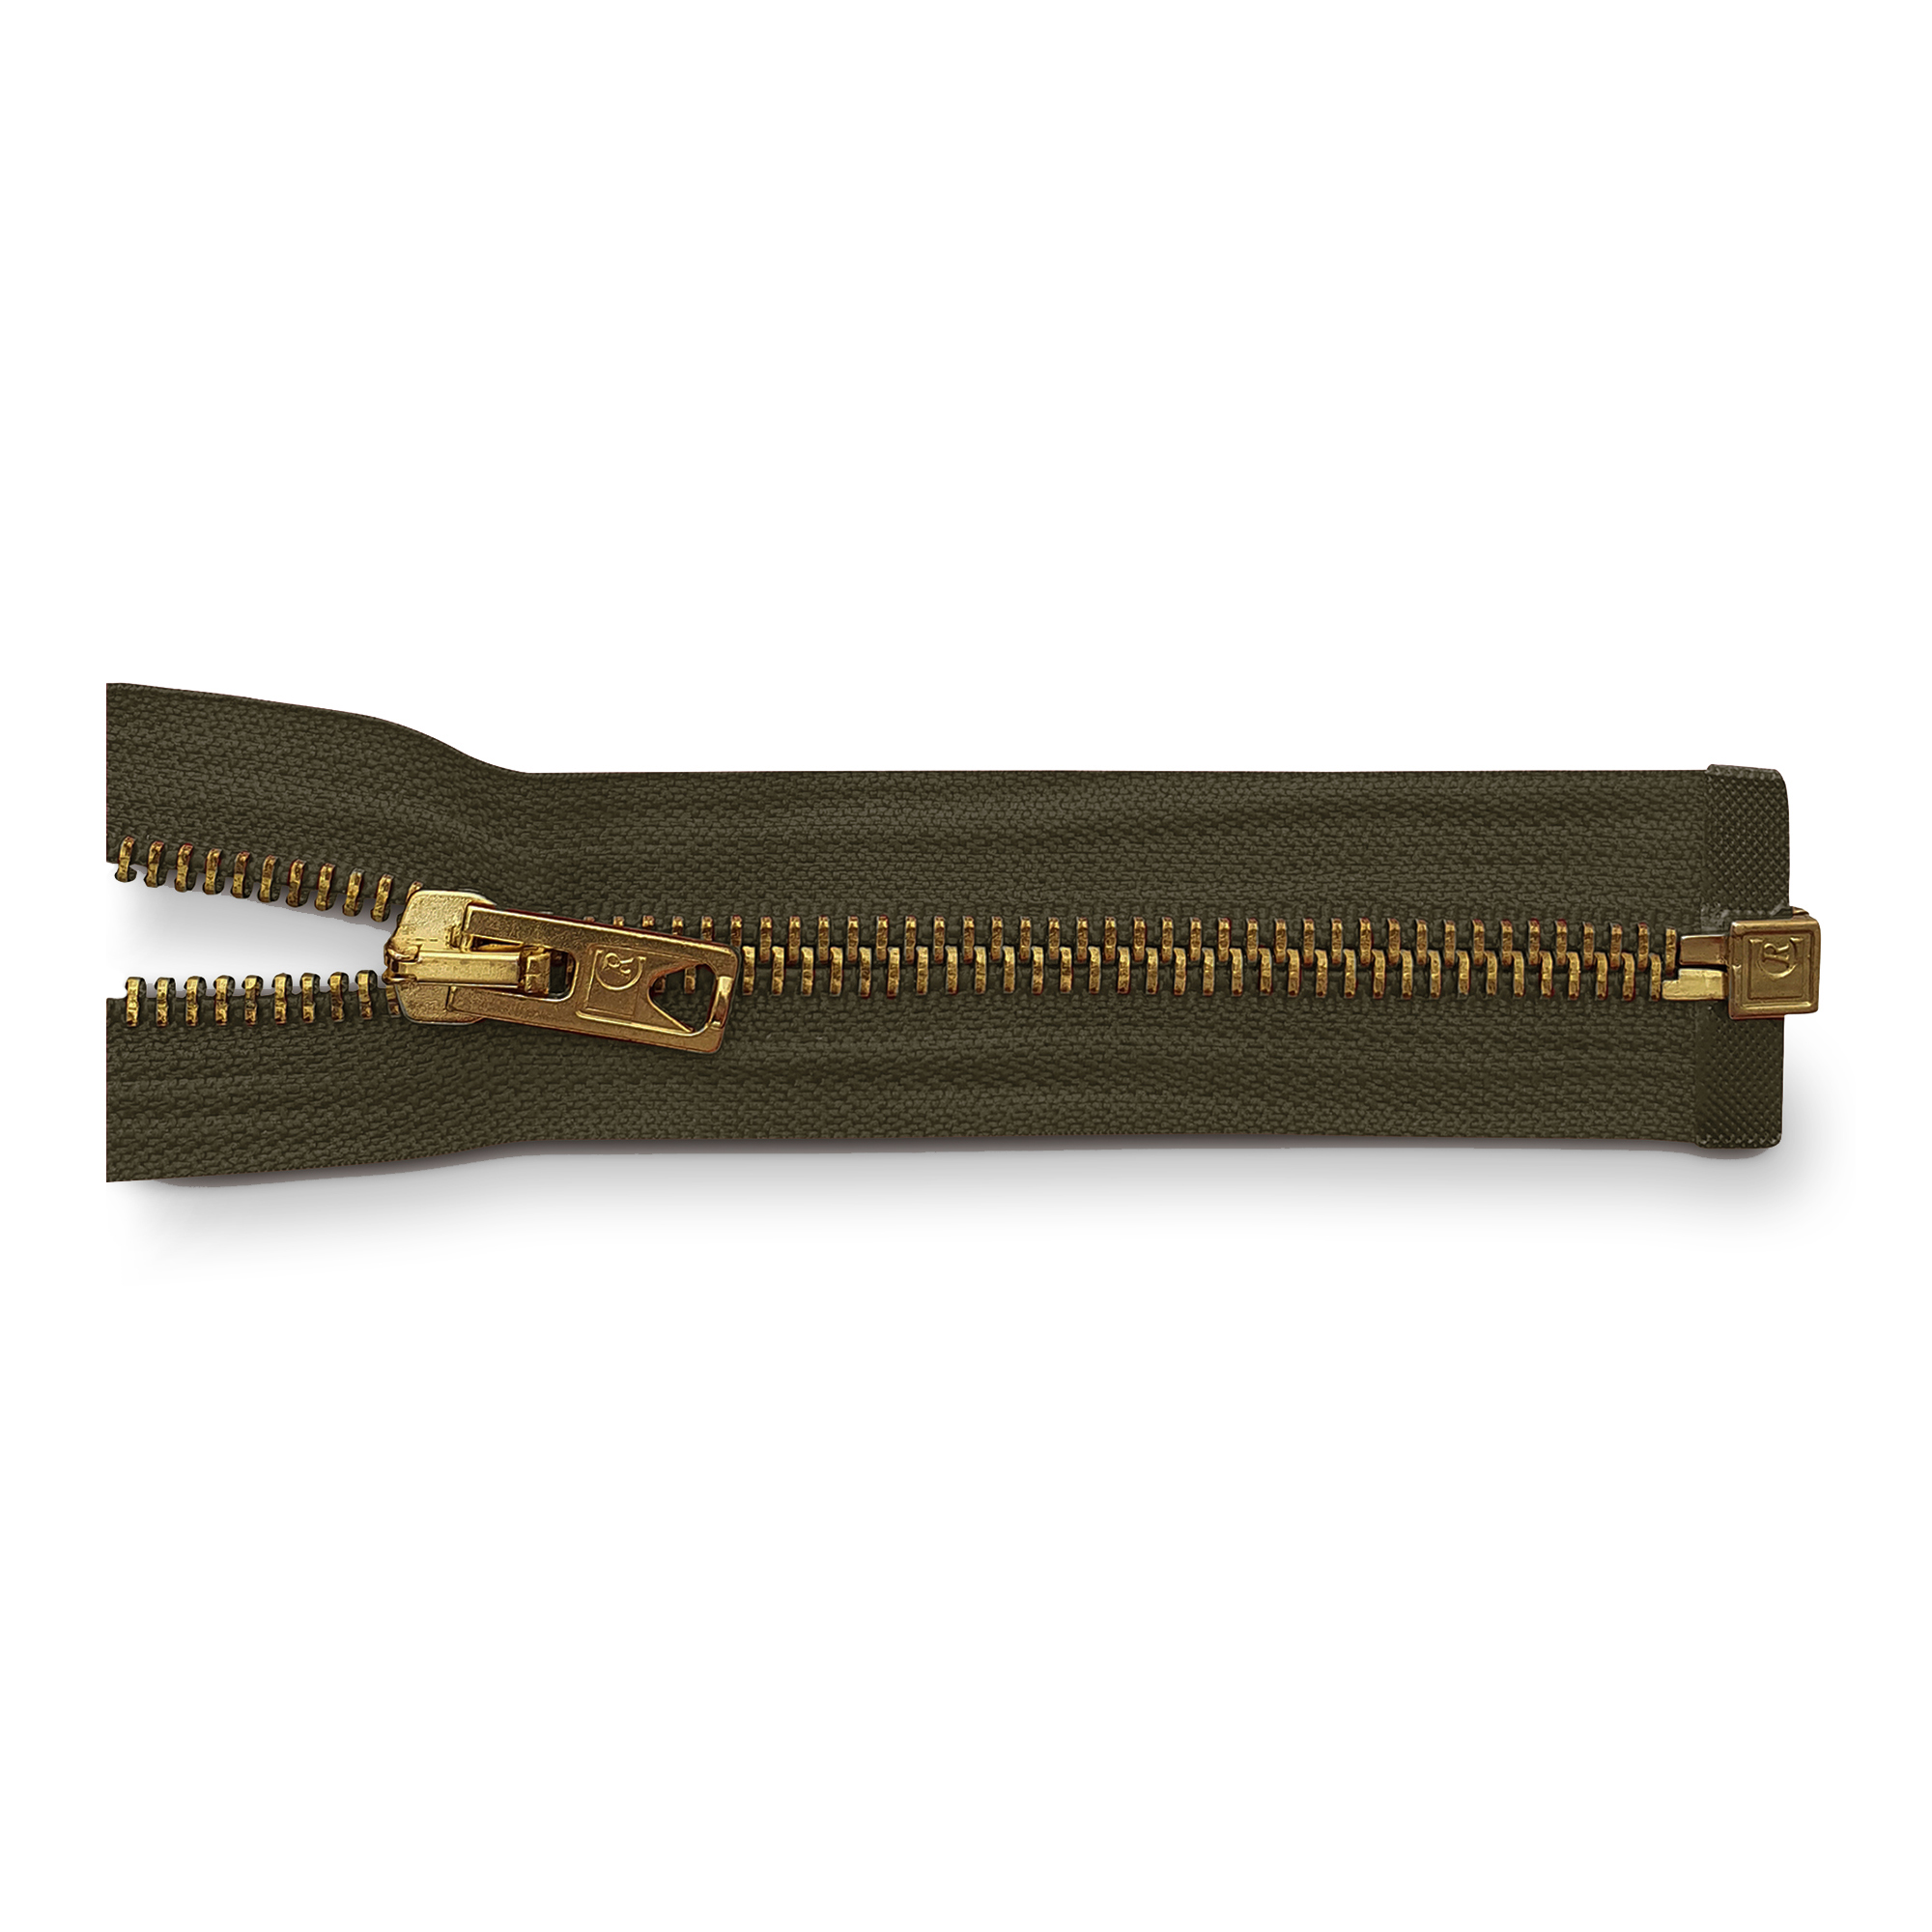 zipper 80cm,divisible, metal, brass, wide, army olive